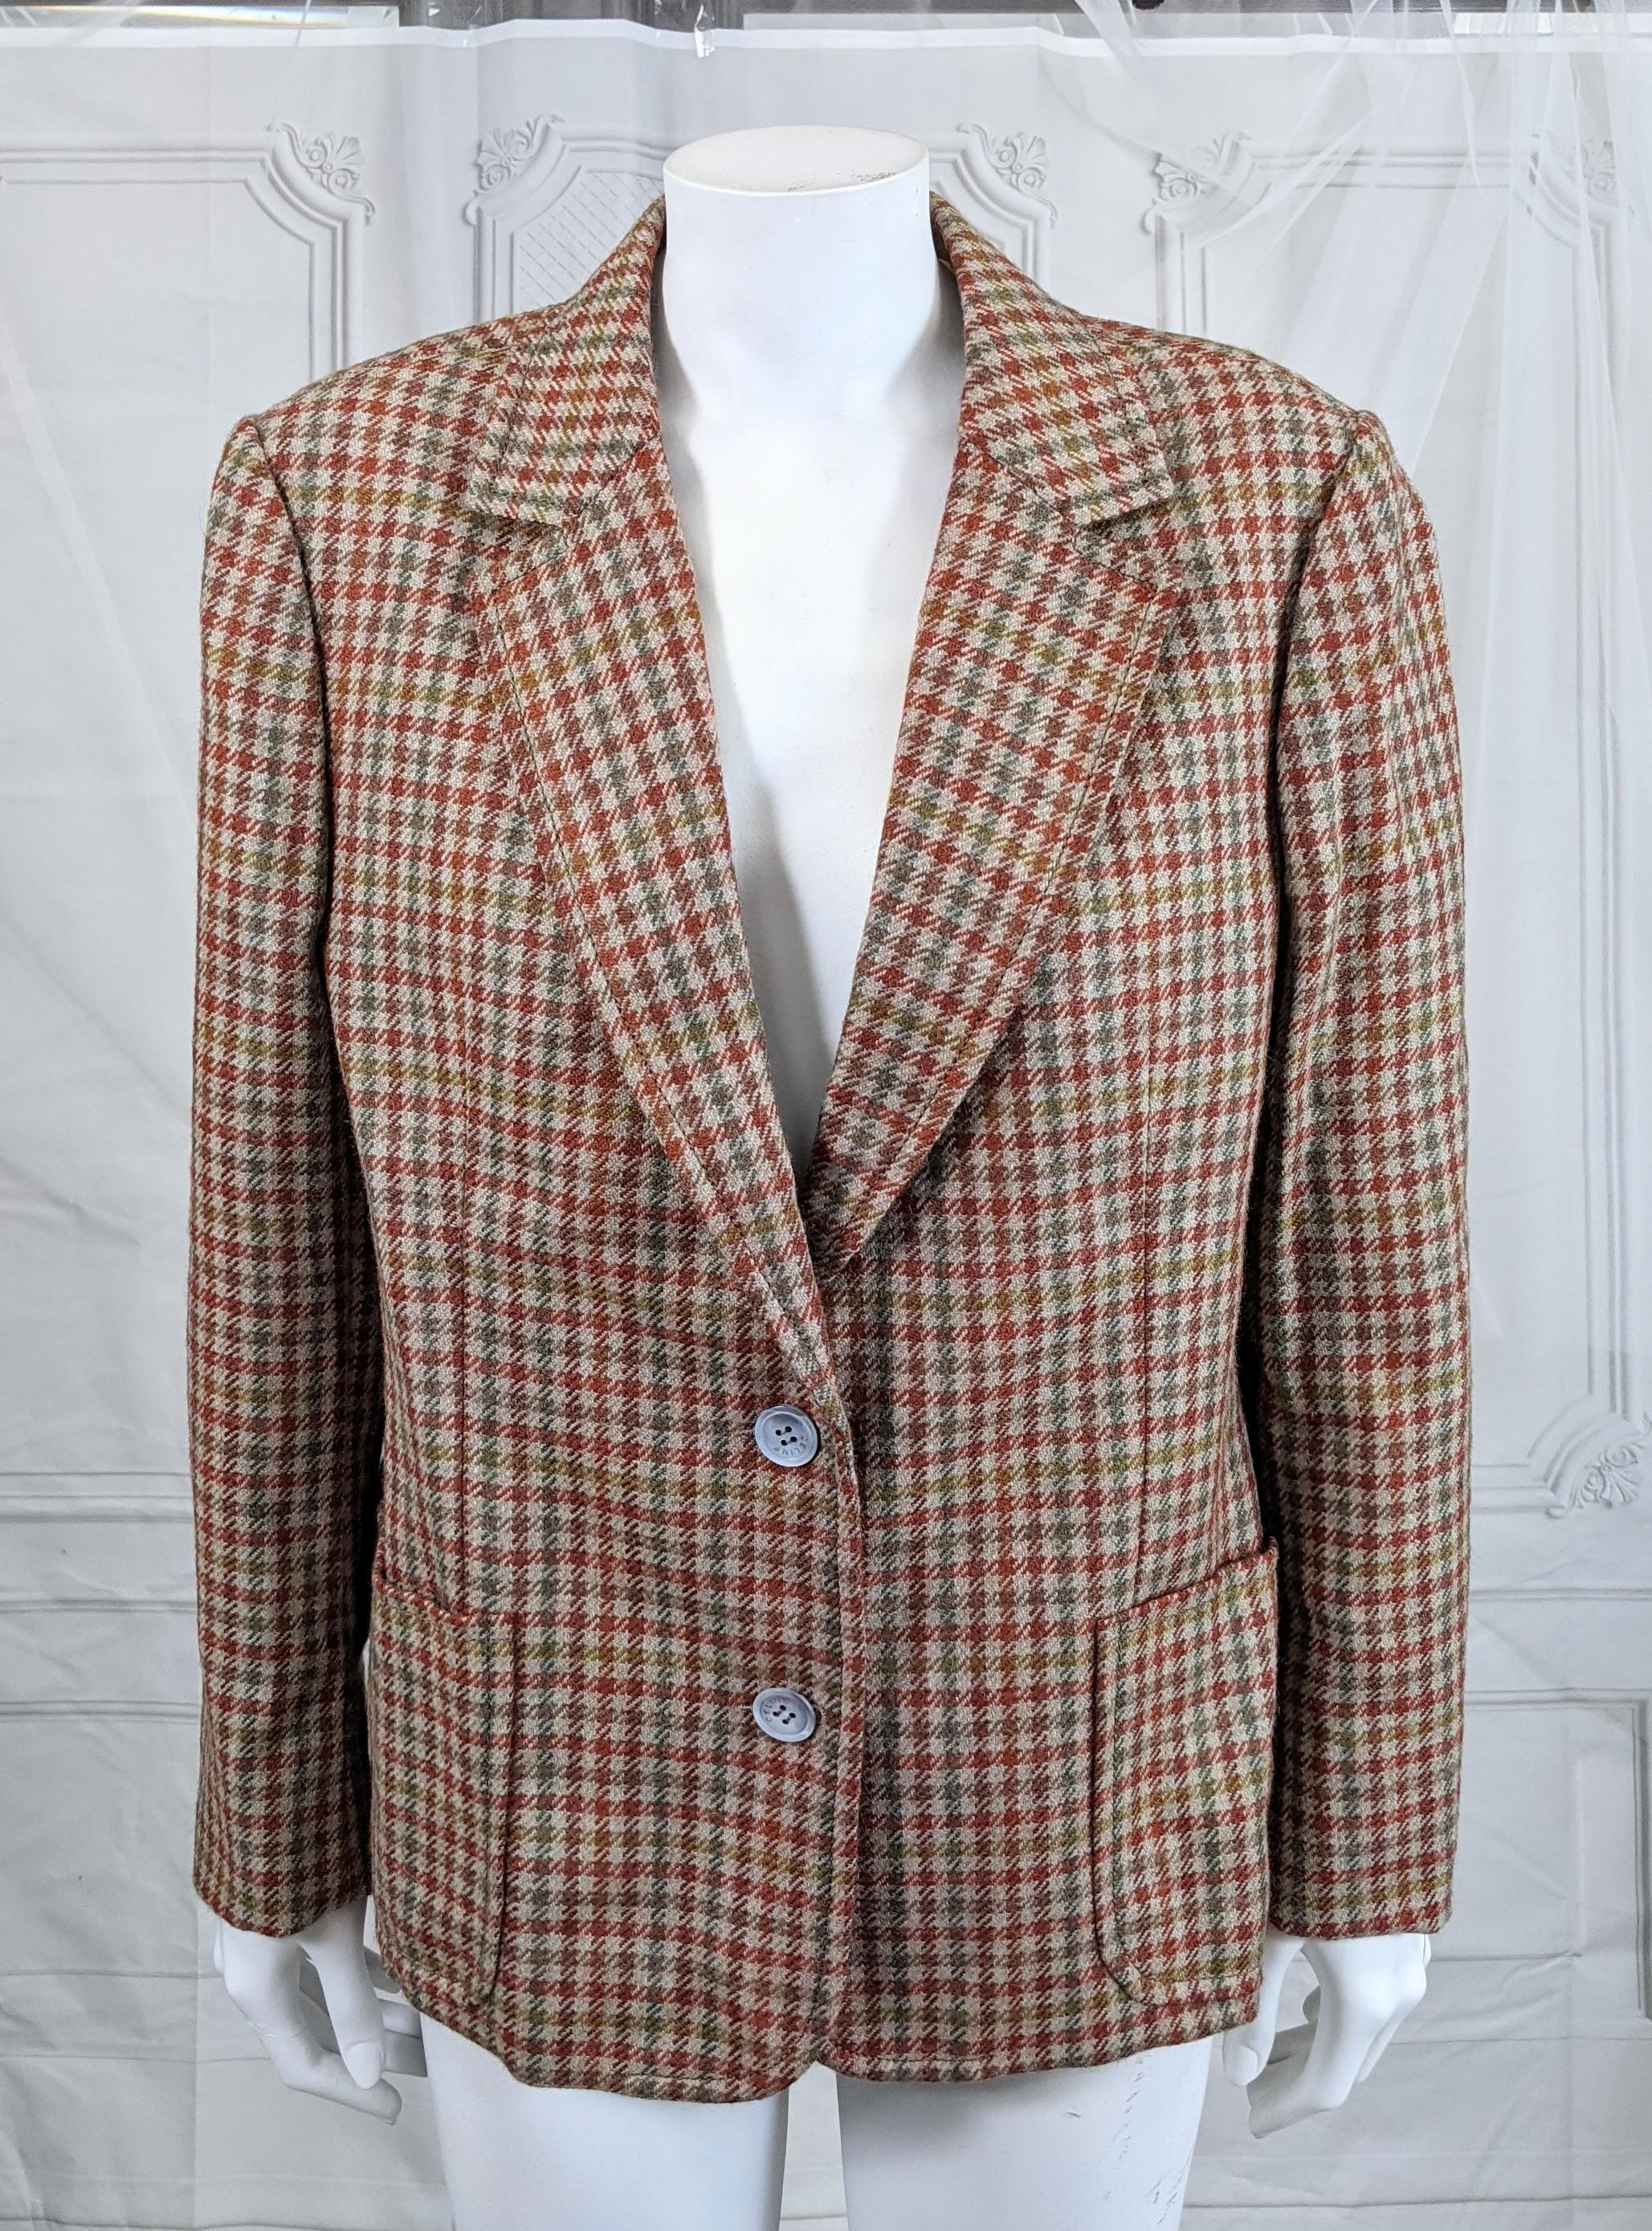 Vintage Celine Tweed Houndstooth Blazer in soft wool in autumnal tones from the 1970's. Straight boxy cut with classic tailoring associated with the French house.
Size 44 vintage (Contemporary is smaller).  Mother of Pearl Logo Celine buttons.